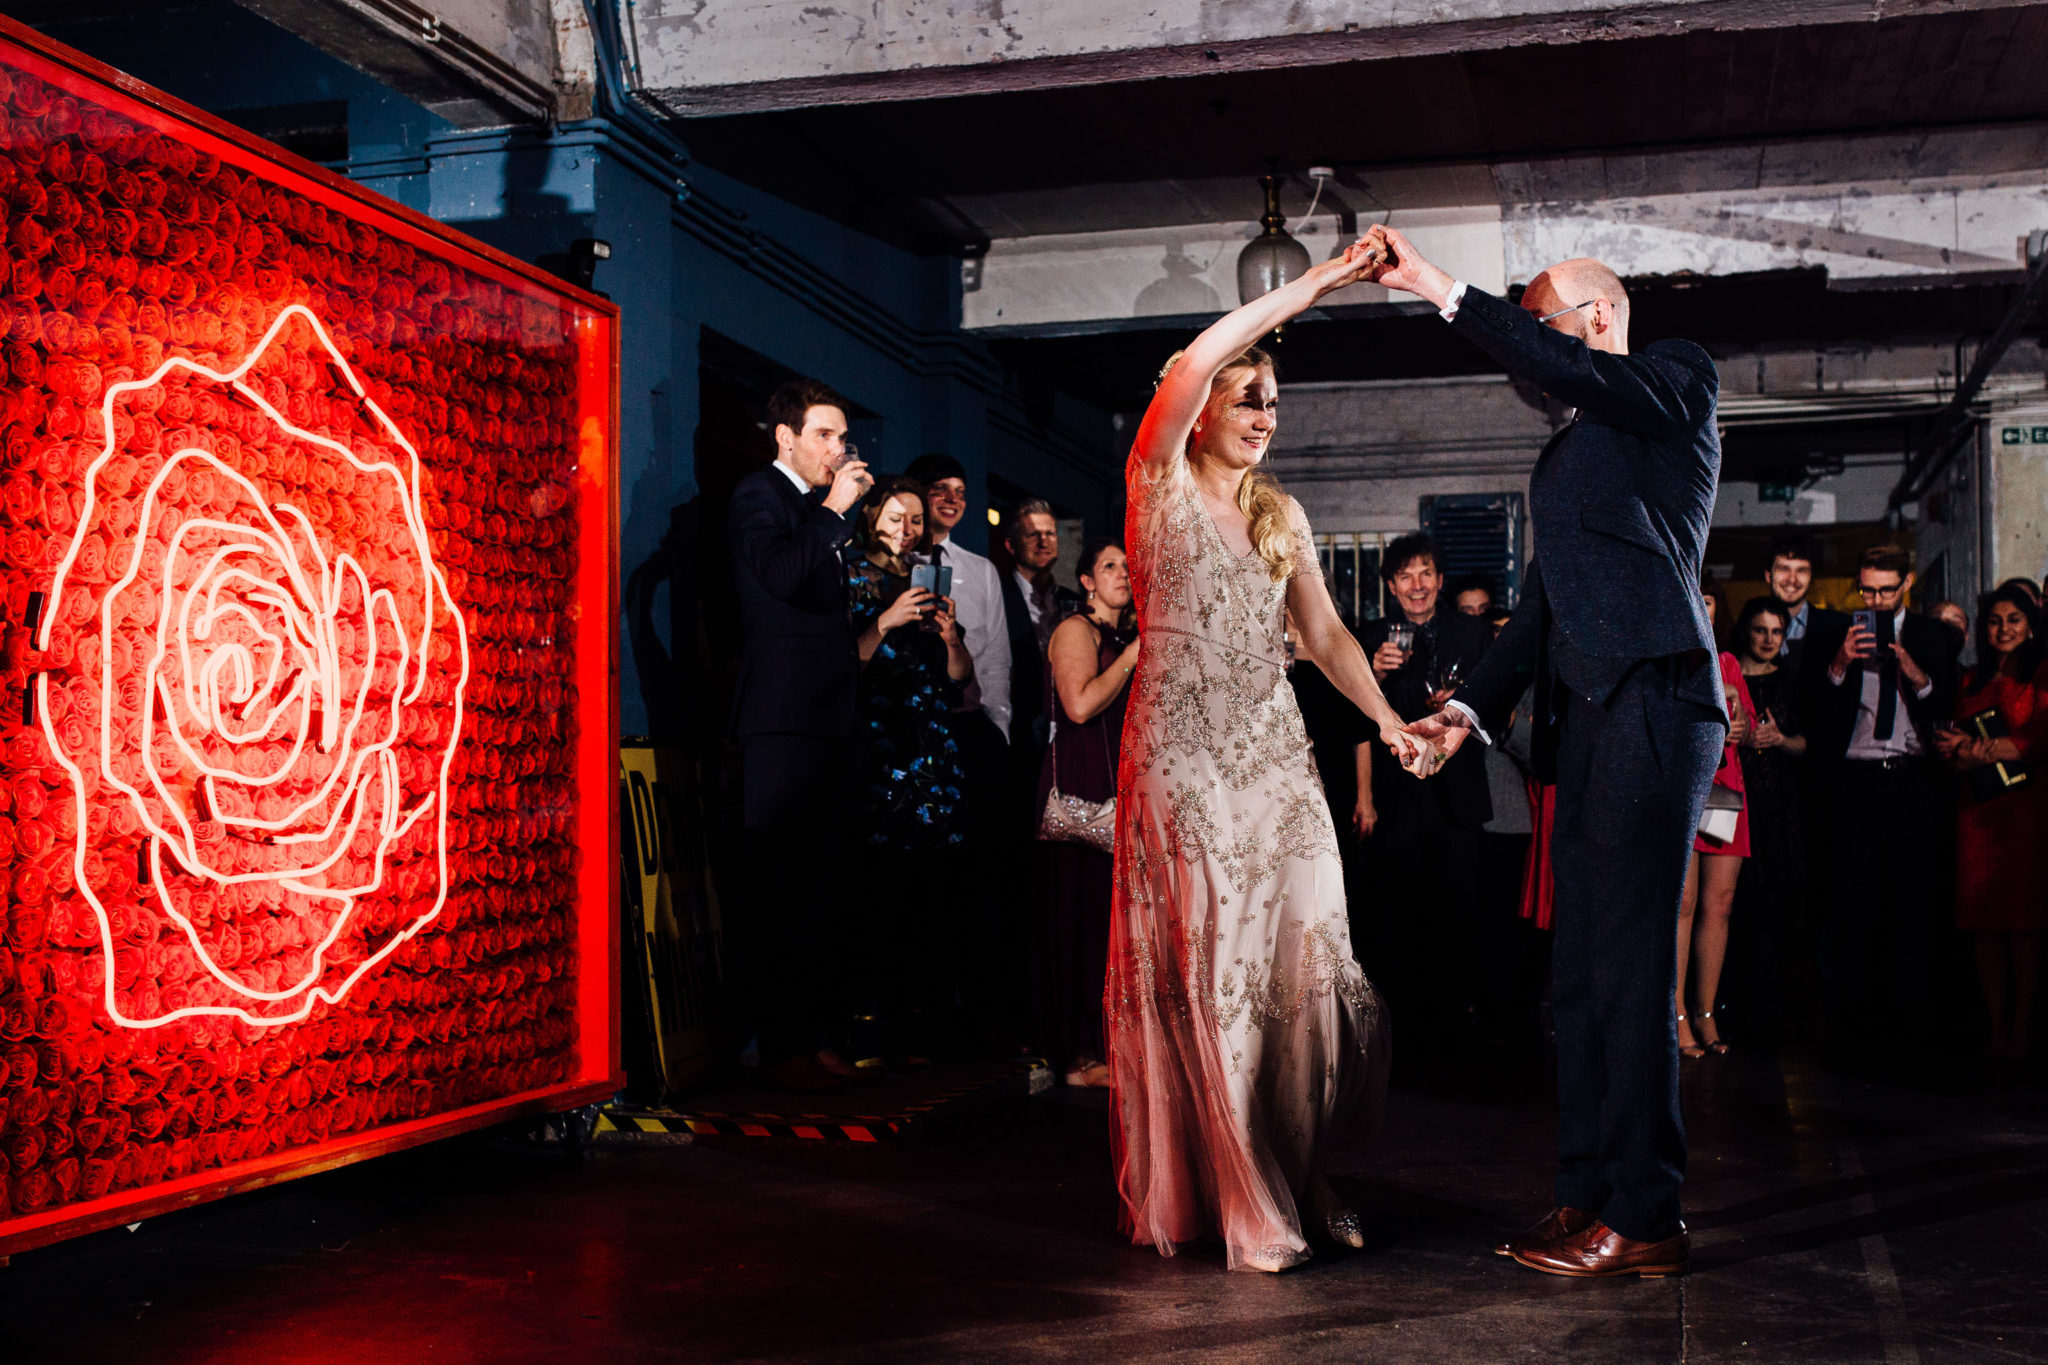 DANCE CANDIDS AT WAREHOUSE WEDDING AT ONE FRIENDLY PLACE LONDON DOCUMENTARY FUN WEDDING PHOTOGRAPHY NEON ROSE